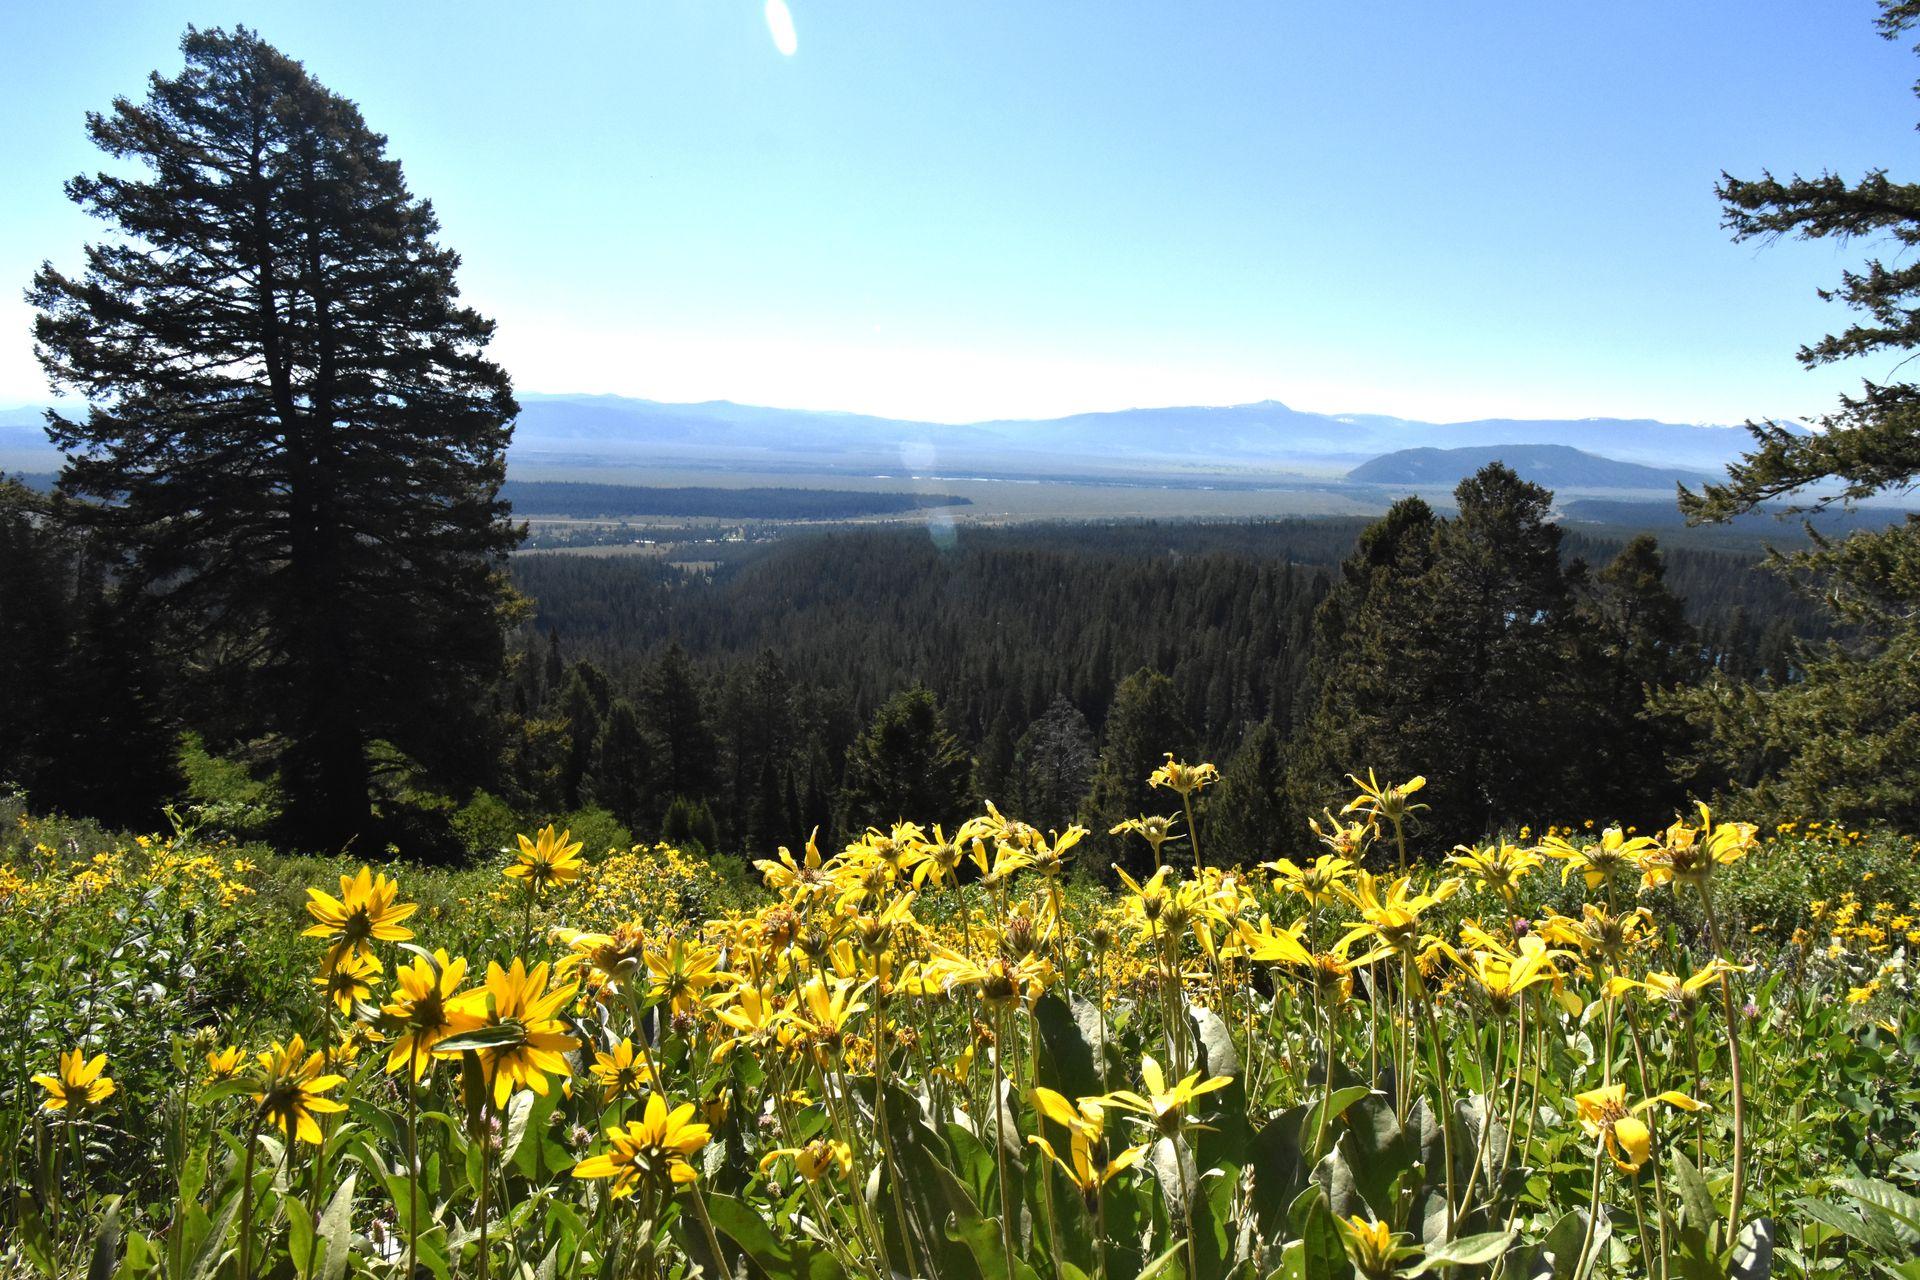 A close up view of yellow wildflowers with a view of a valley in the distance.